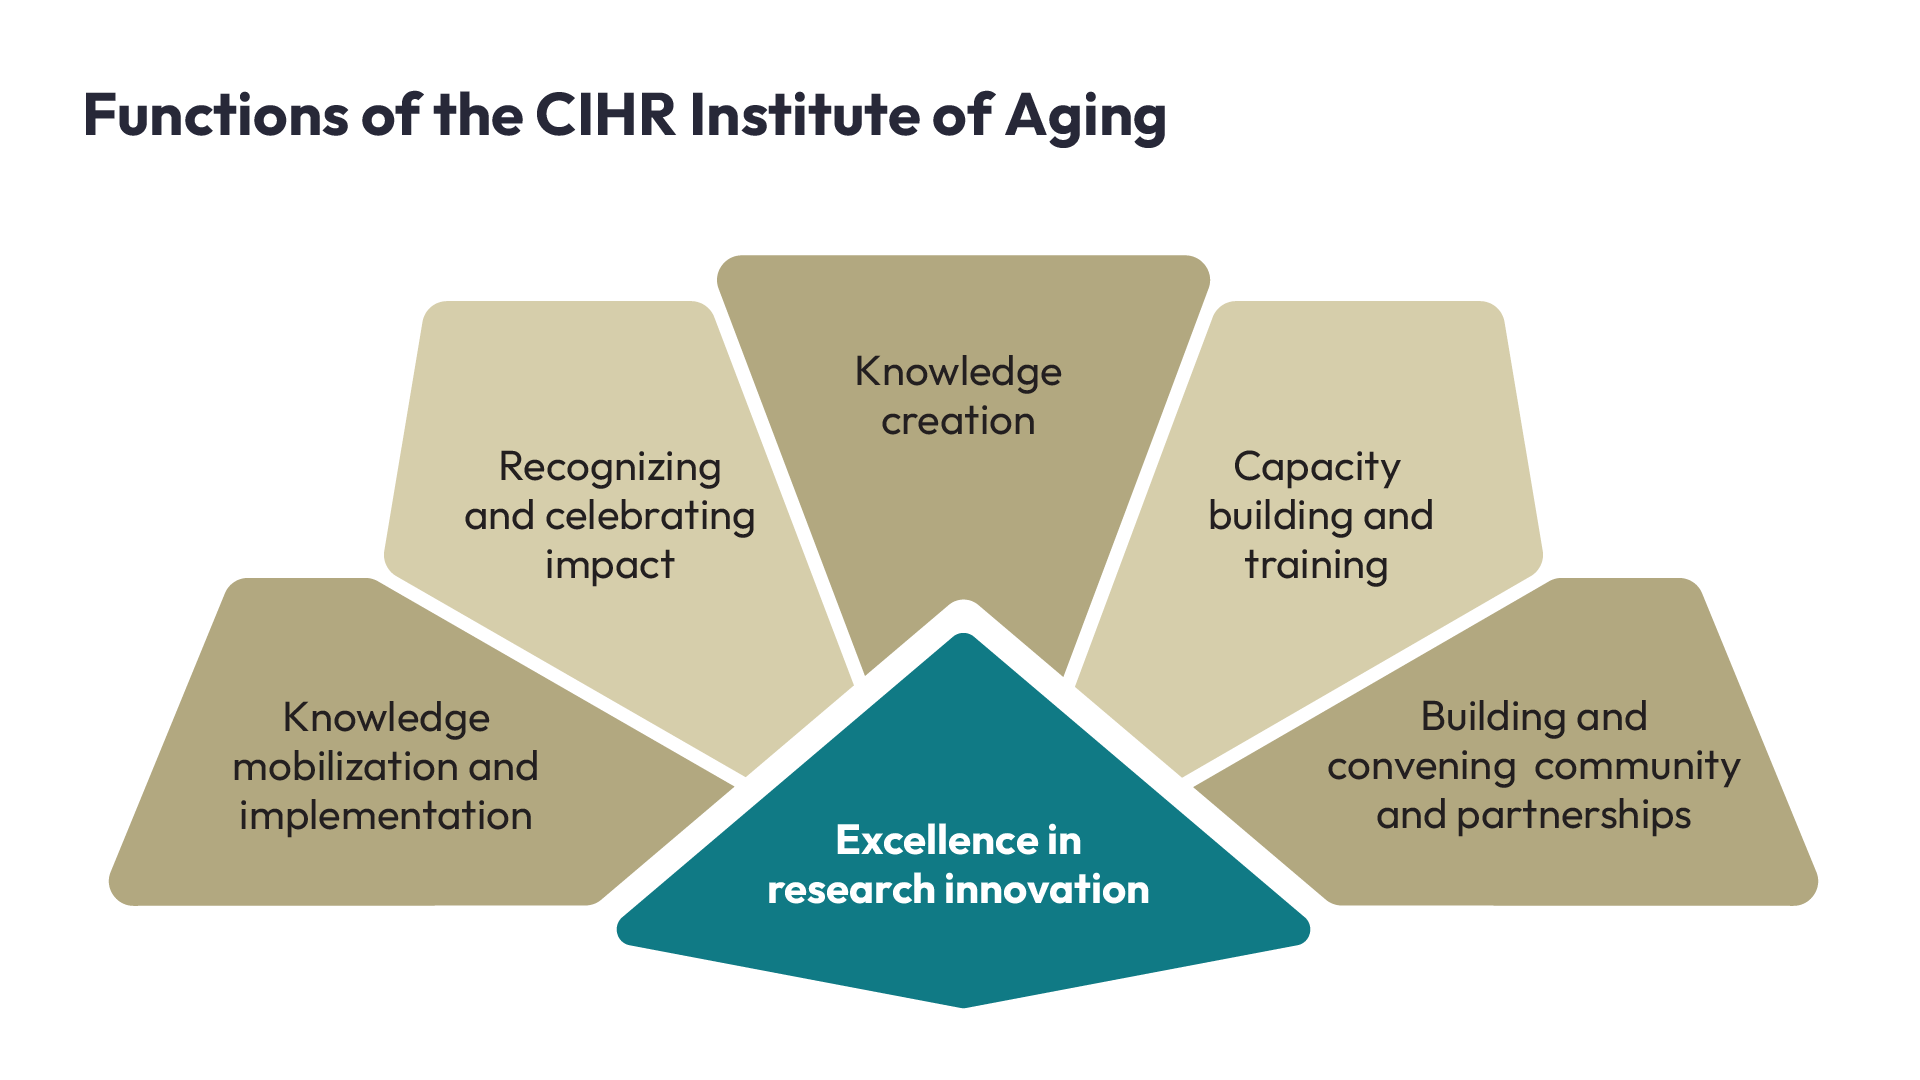 Functions of the CIHR Institute of Aging